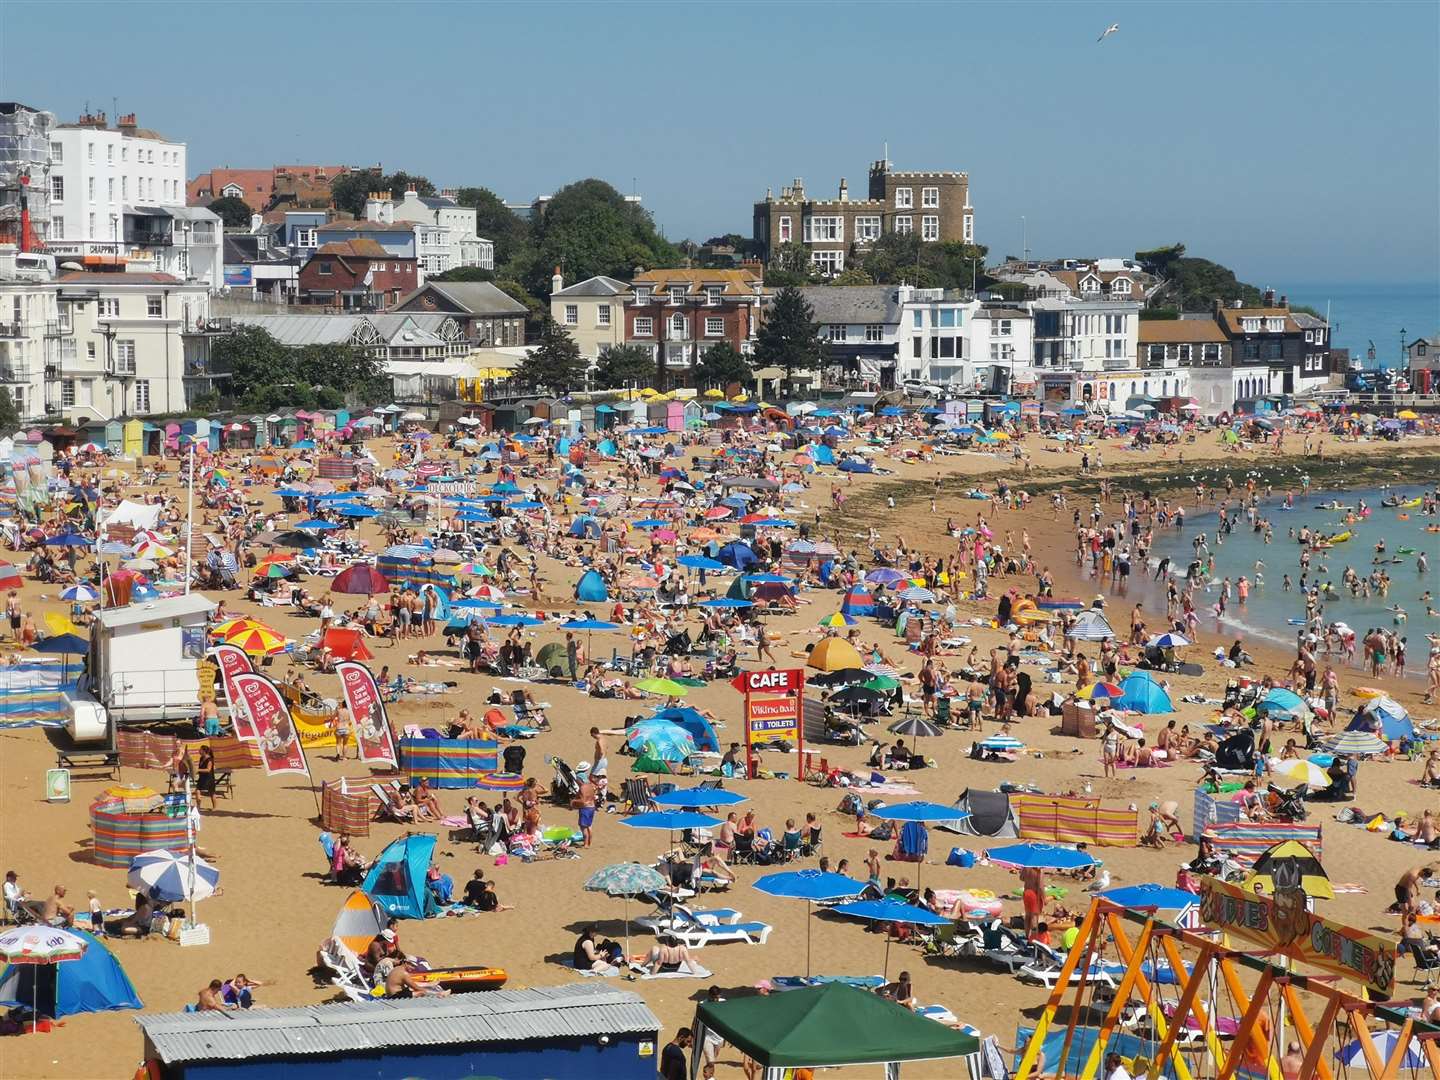 It may look bright and sunny, but according to recent stats Thanet has the lowest life satisfaction in Kent